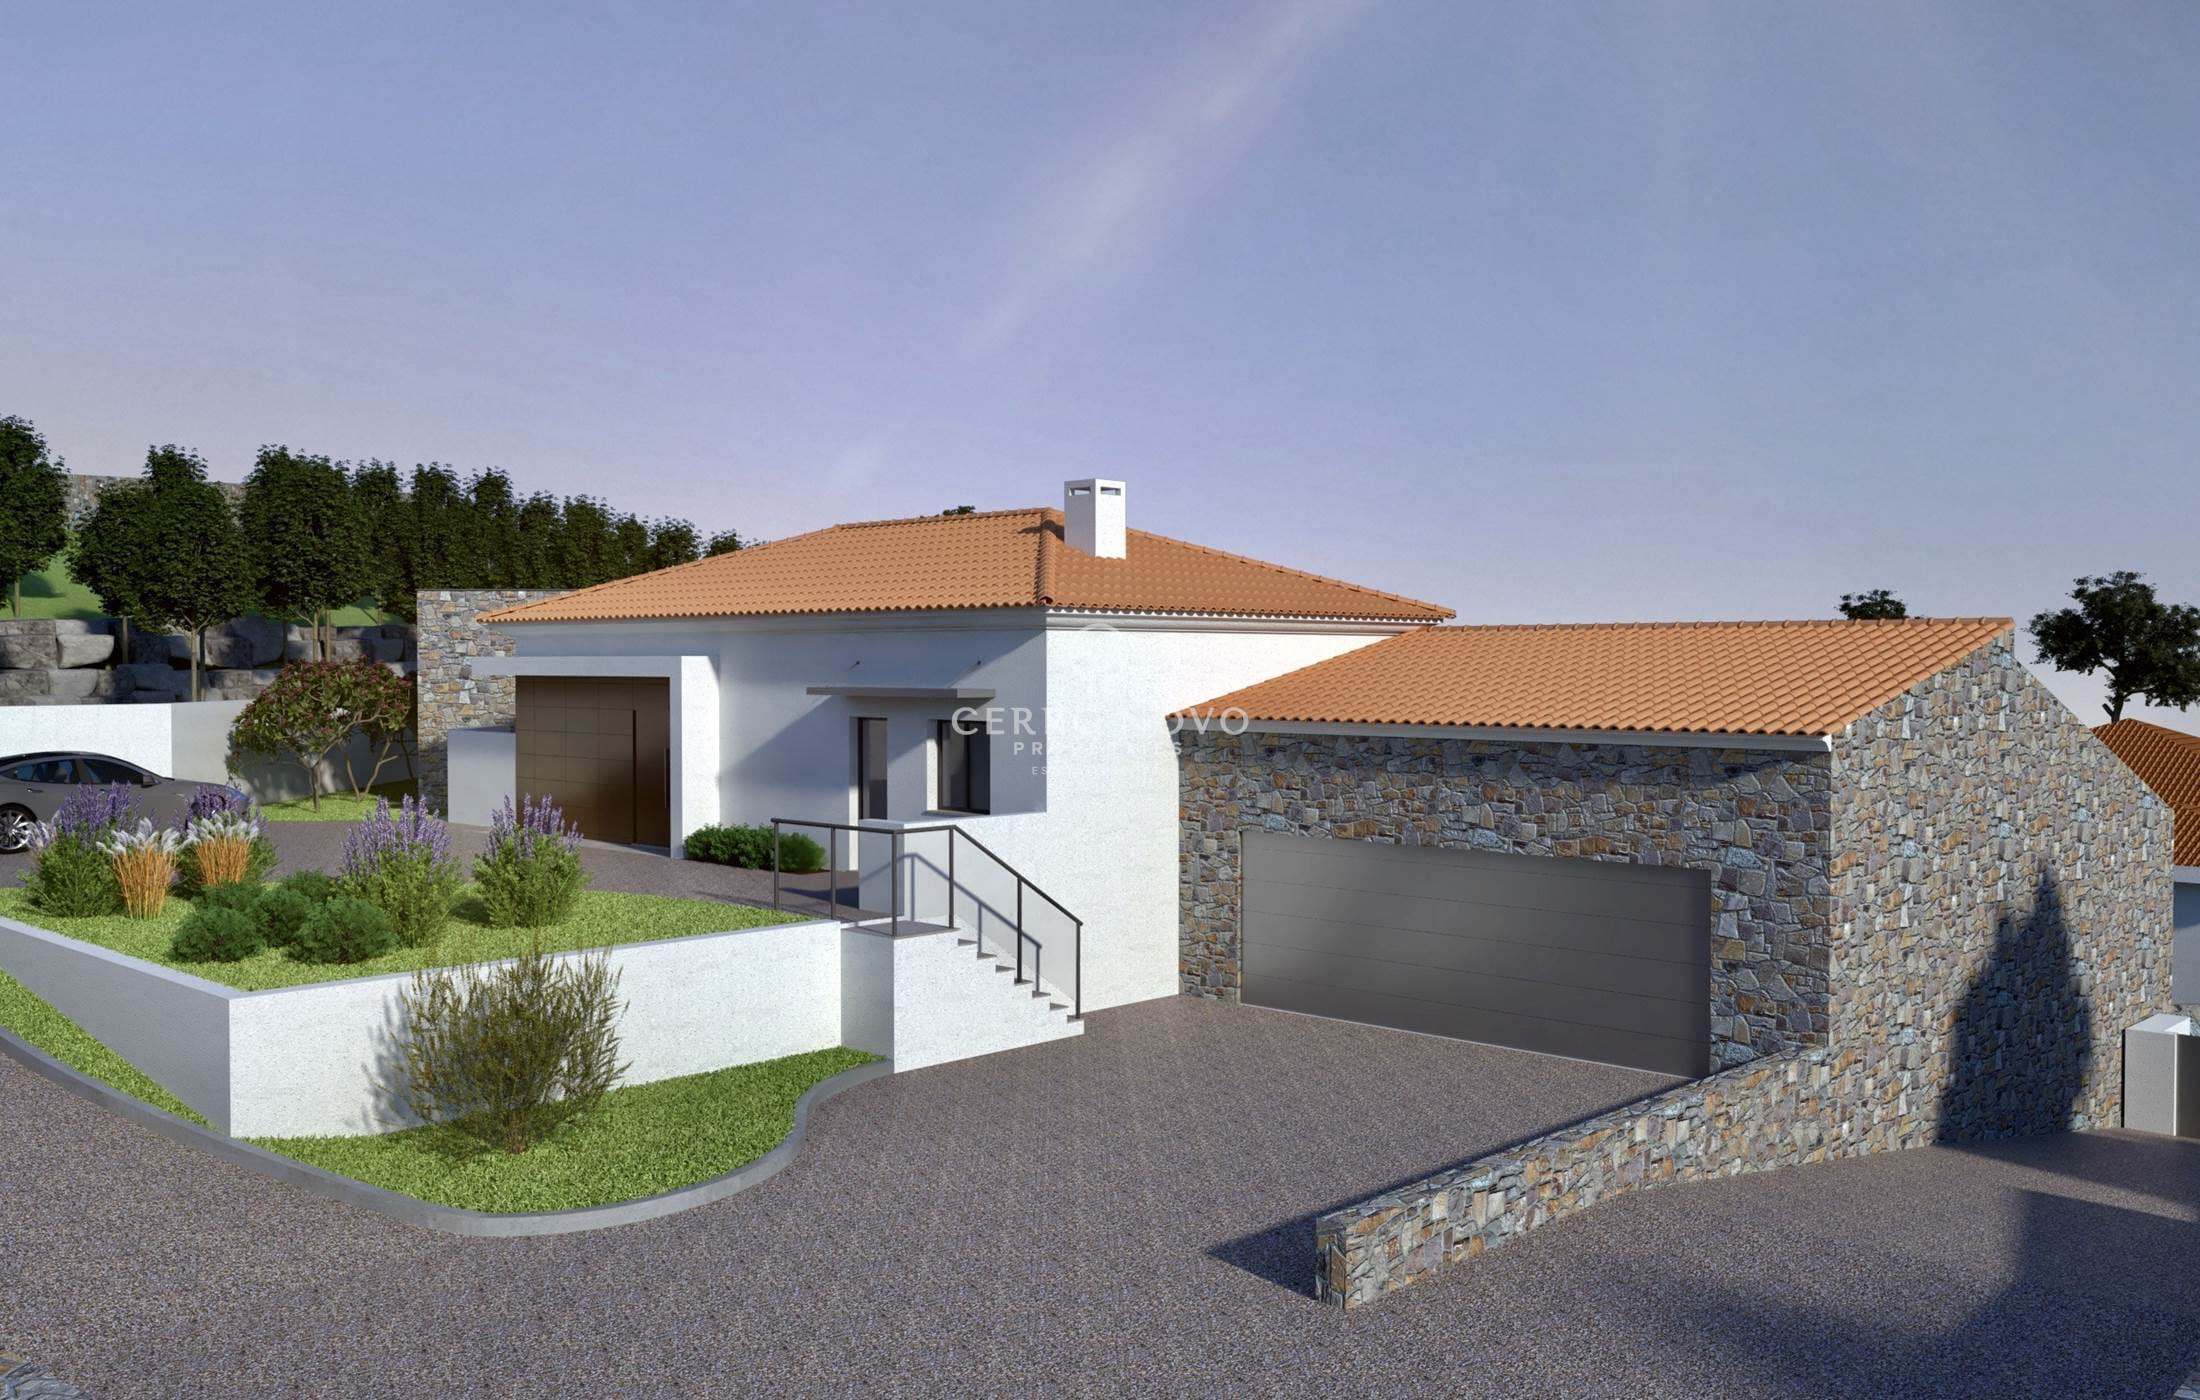 Excellent plots with sea view and planning permission near Tunes, Algarve